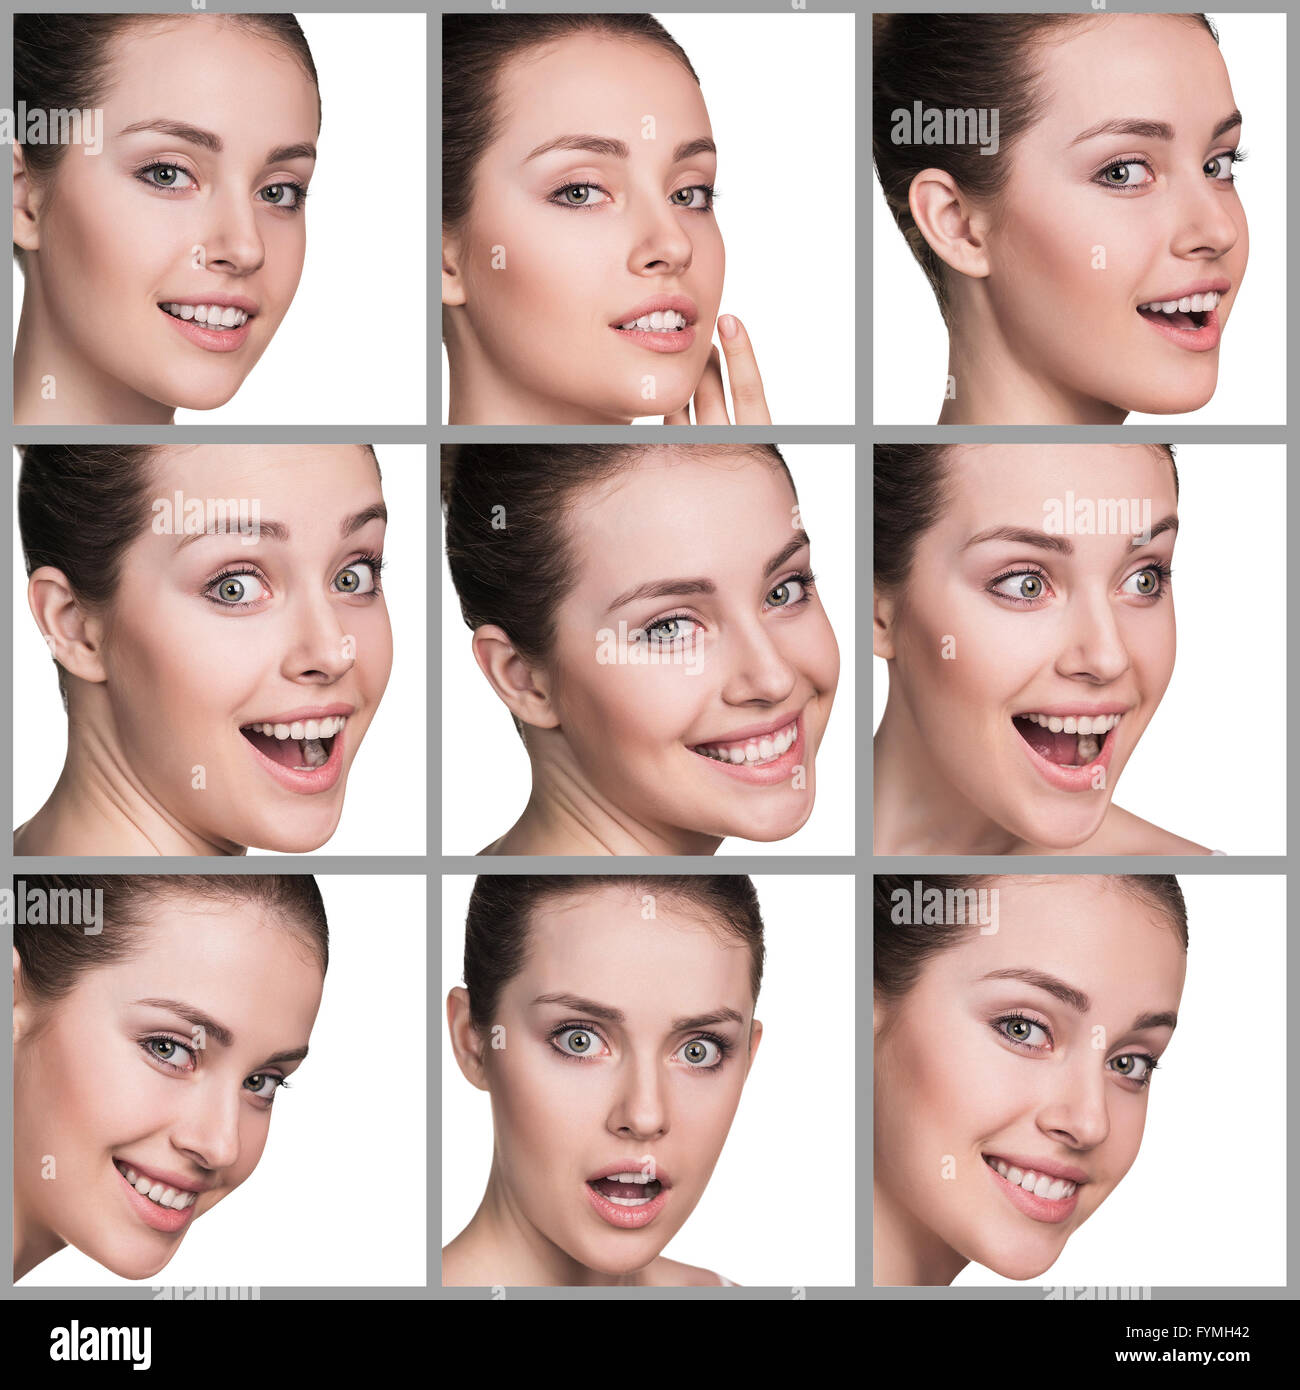 Woman different facial expressions Stock Photo